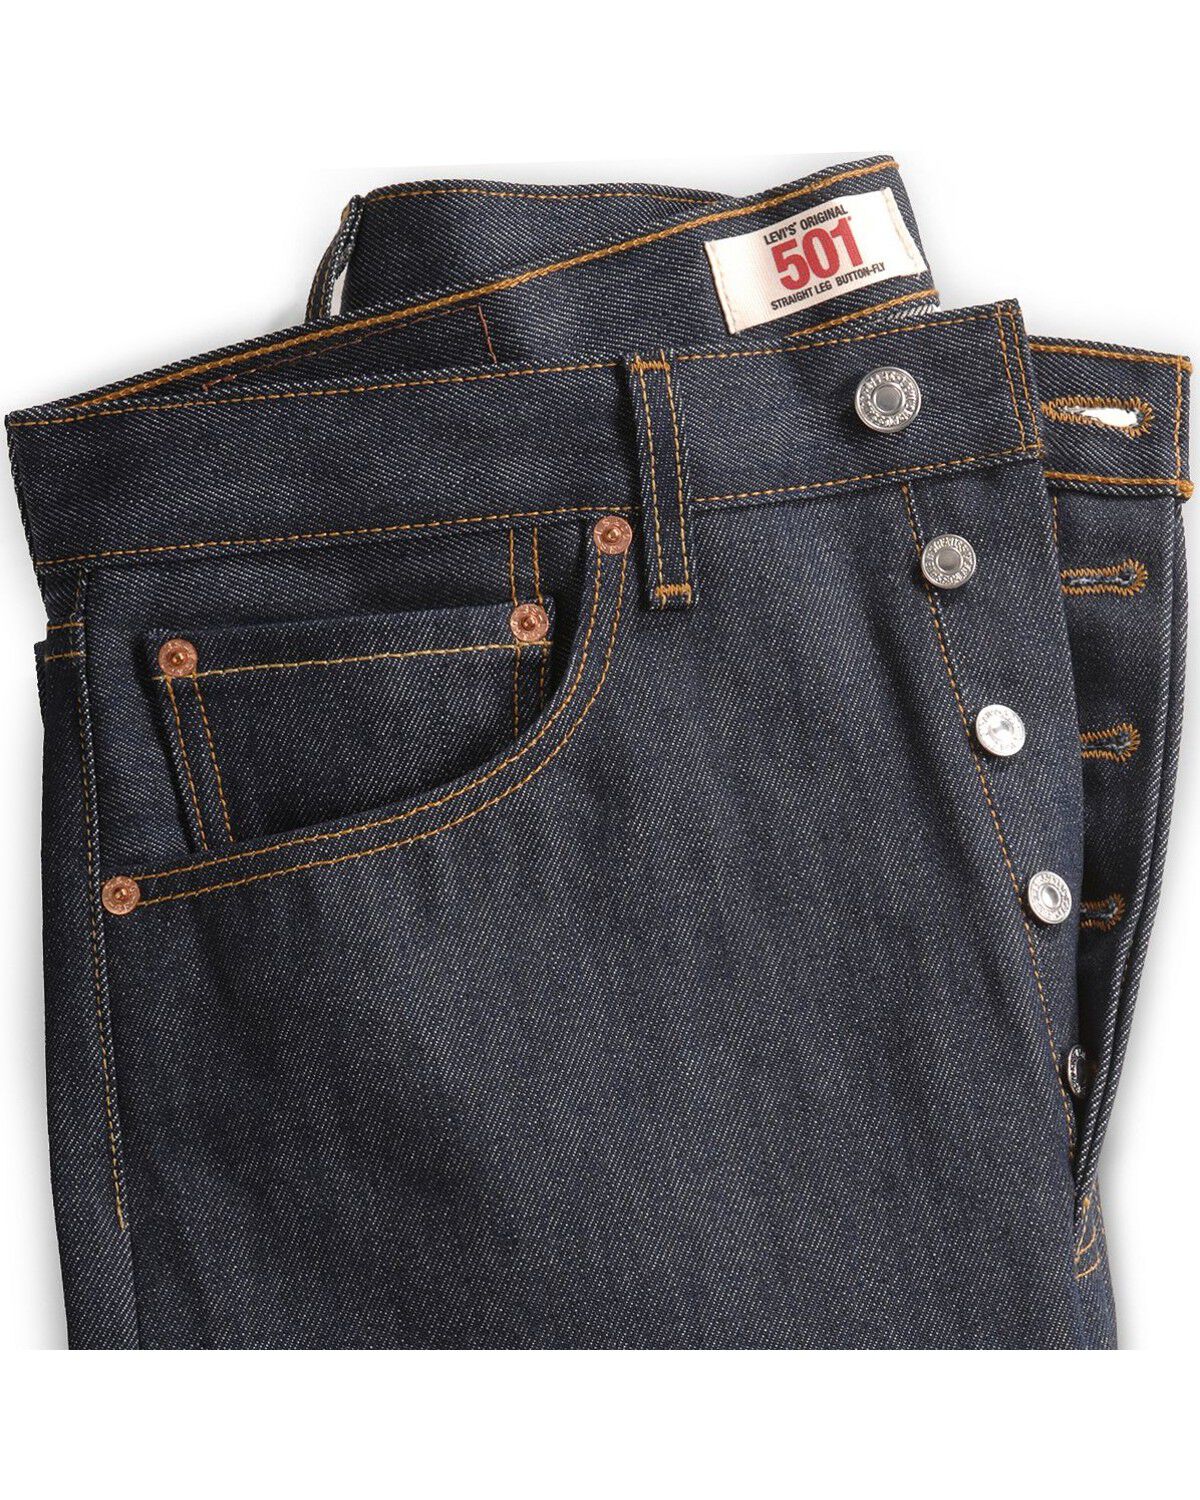 NEW LEVI'S 501 MEN'S ORIGINAL FIT STRAIGHT LEG JEANS BUTTON FLY GREEN 501-1927 